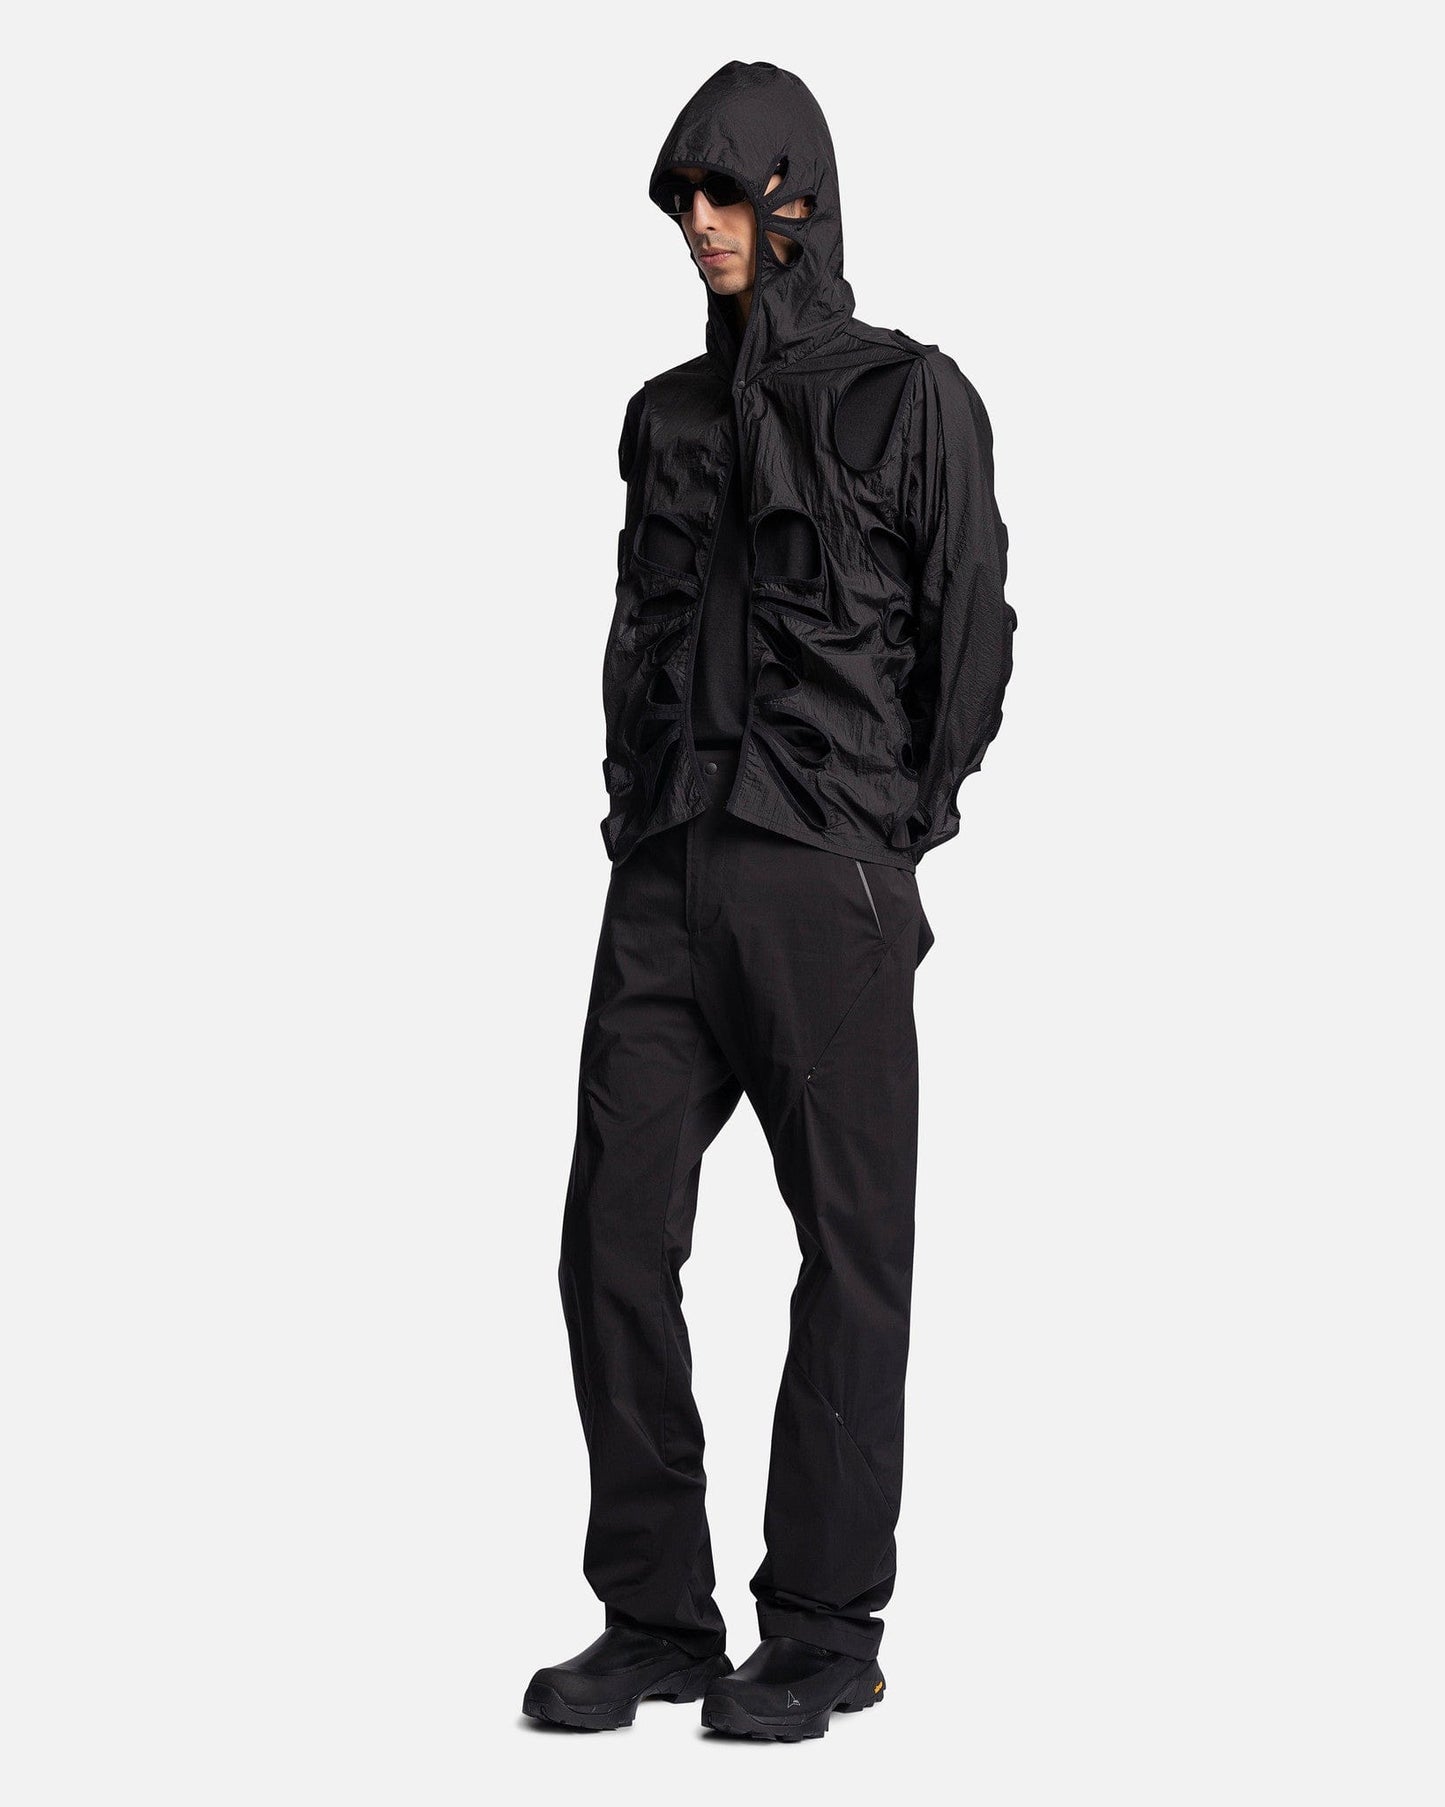 POST ARCHIVE FACTION (P.A.F) Men's Jackets 5.0+ Technical Jacket Left in Black